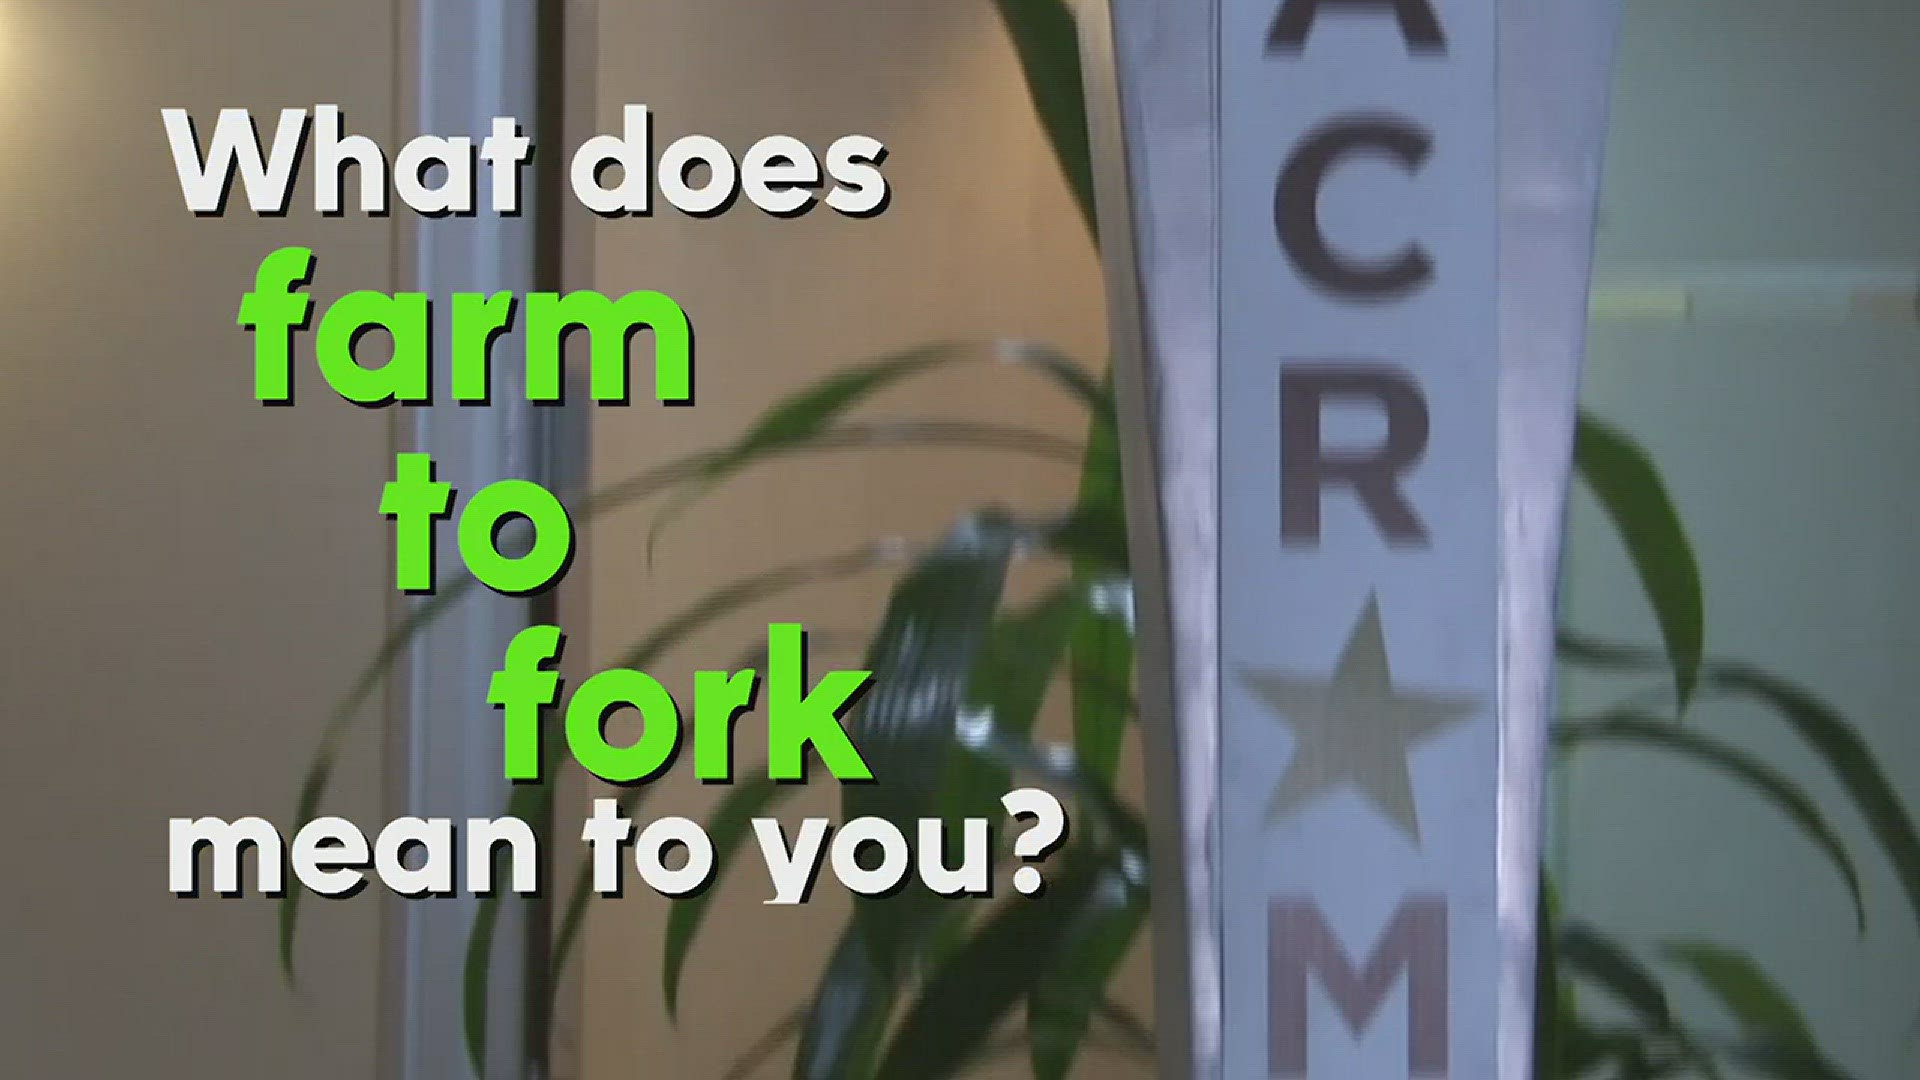 Mike Testa, President and CEO of Visit Sacramento, tells us what 'Farm-to-Fork' means to him.